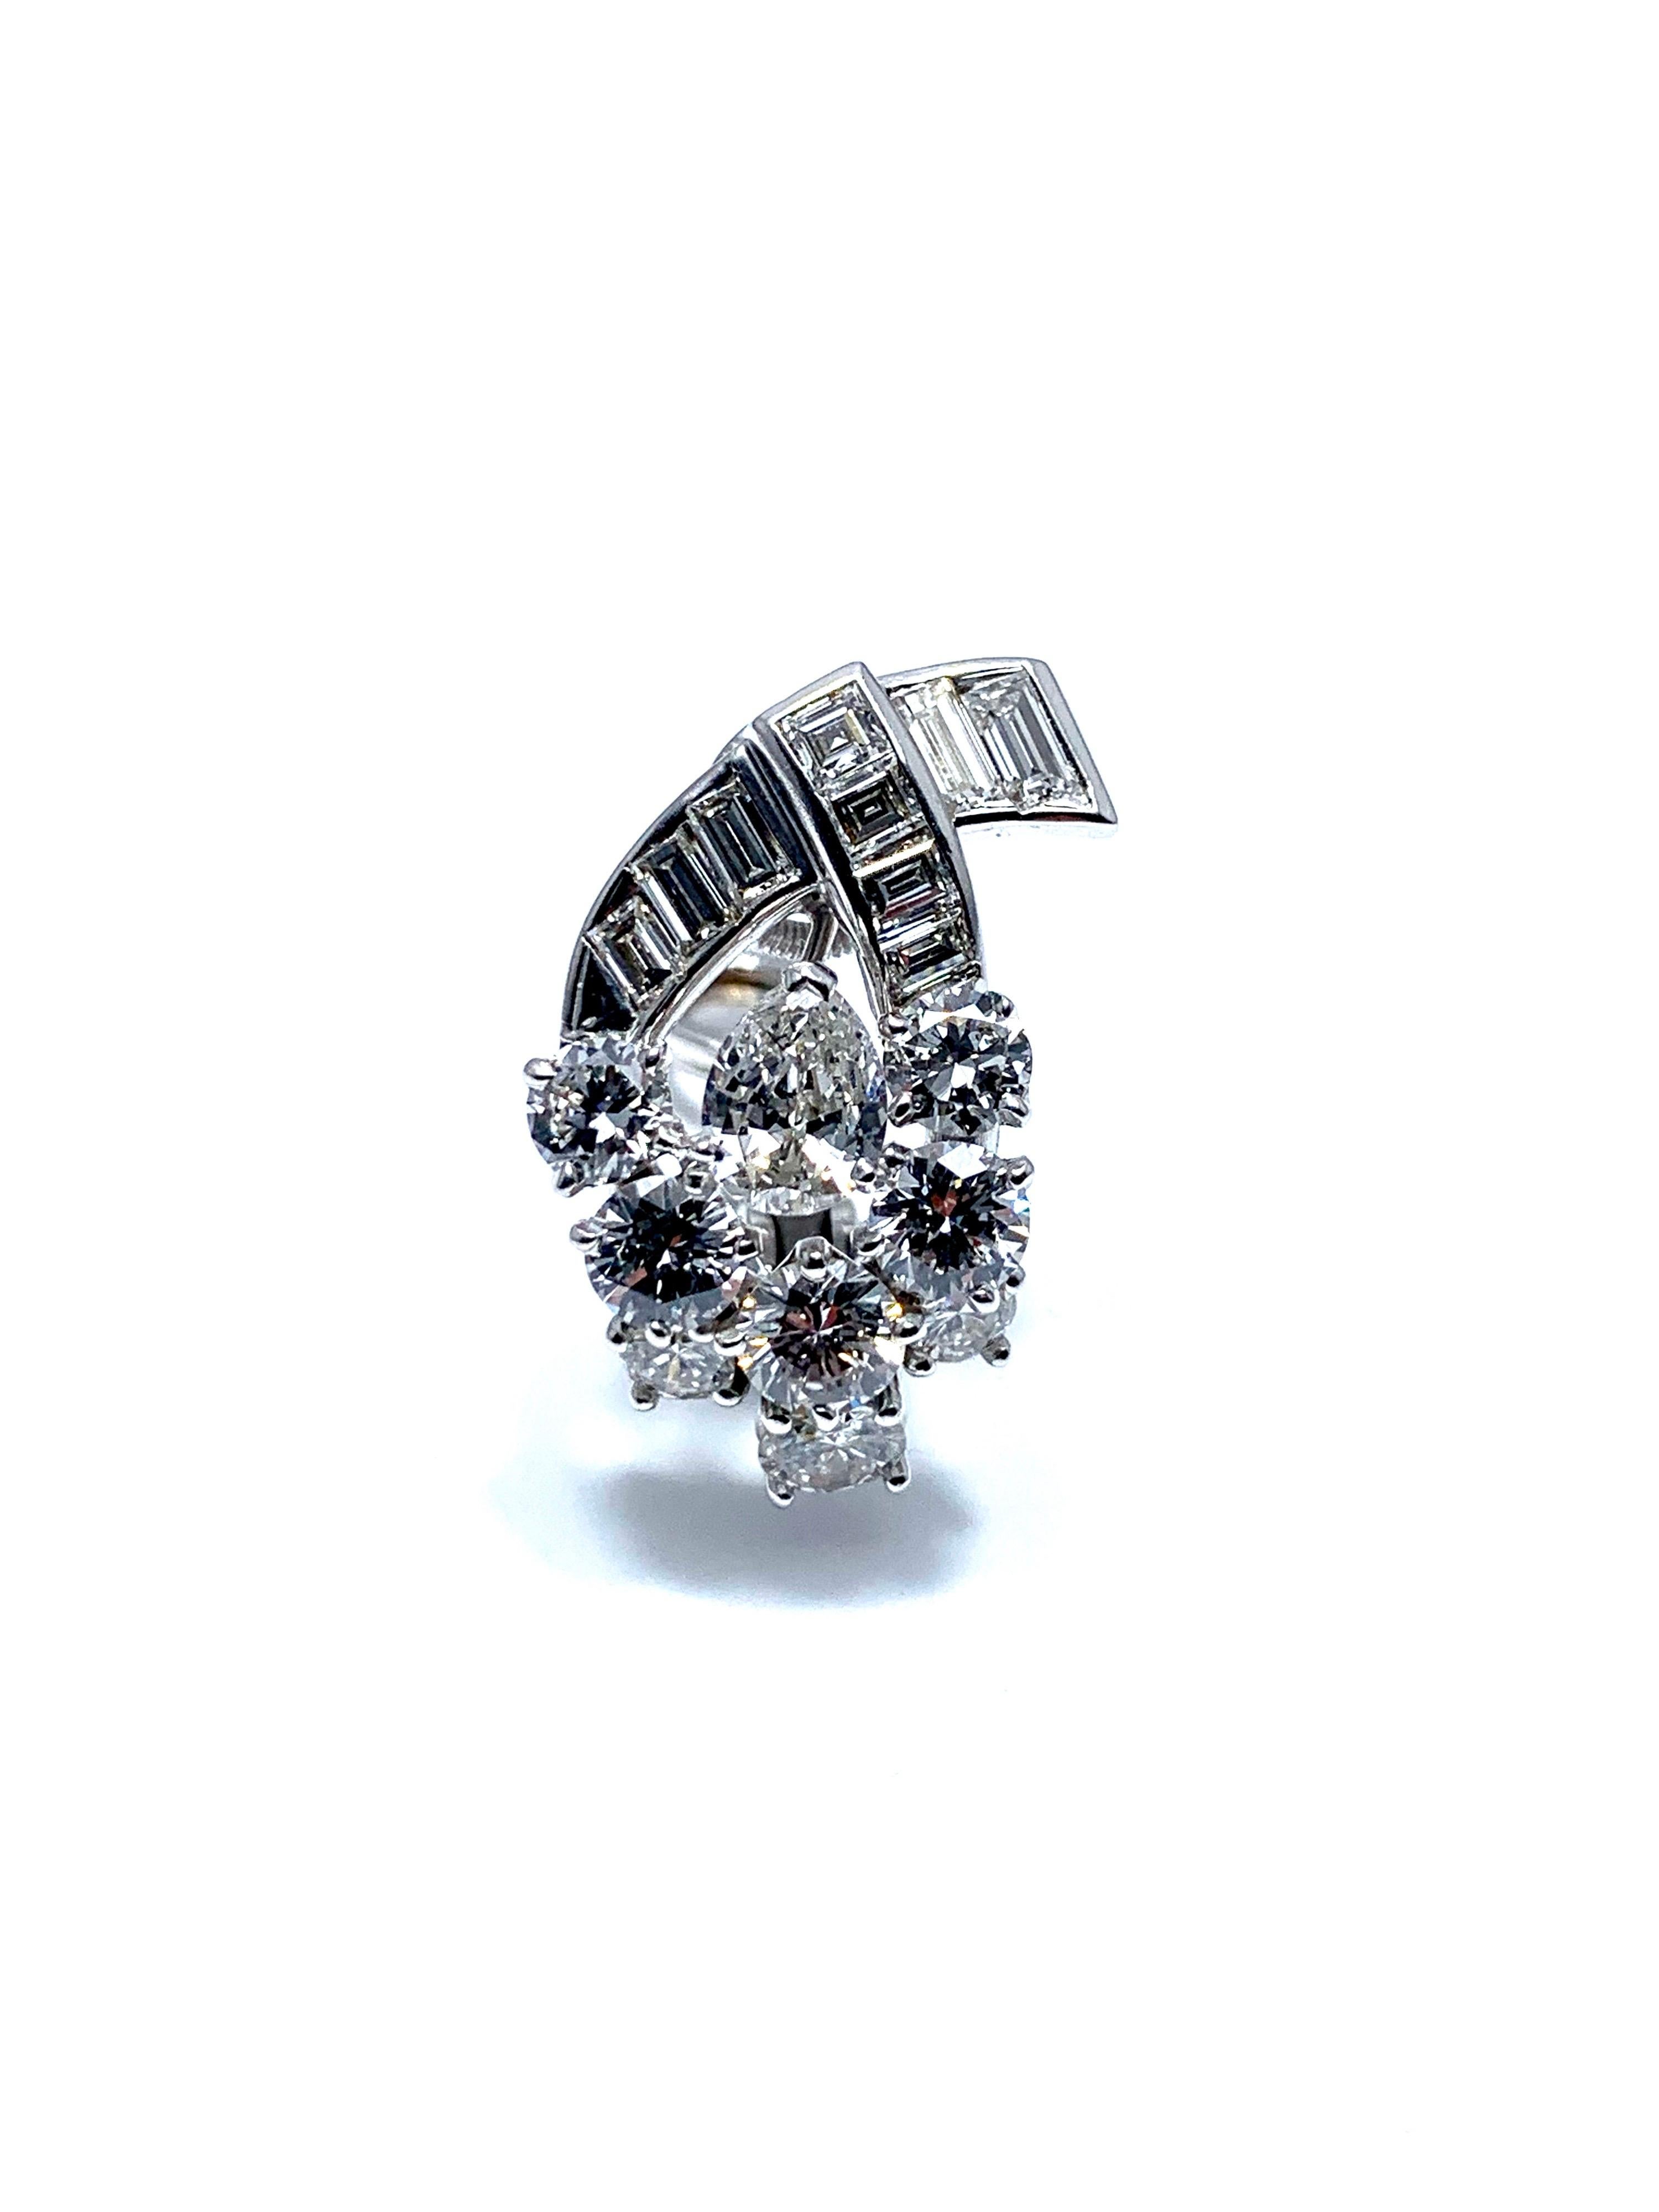 5.32 Carat Diamond and Platinum Clip Earrings For Sale 1